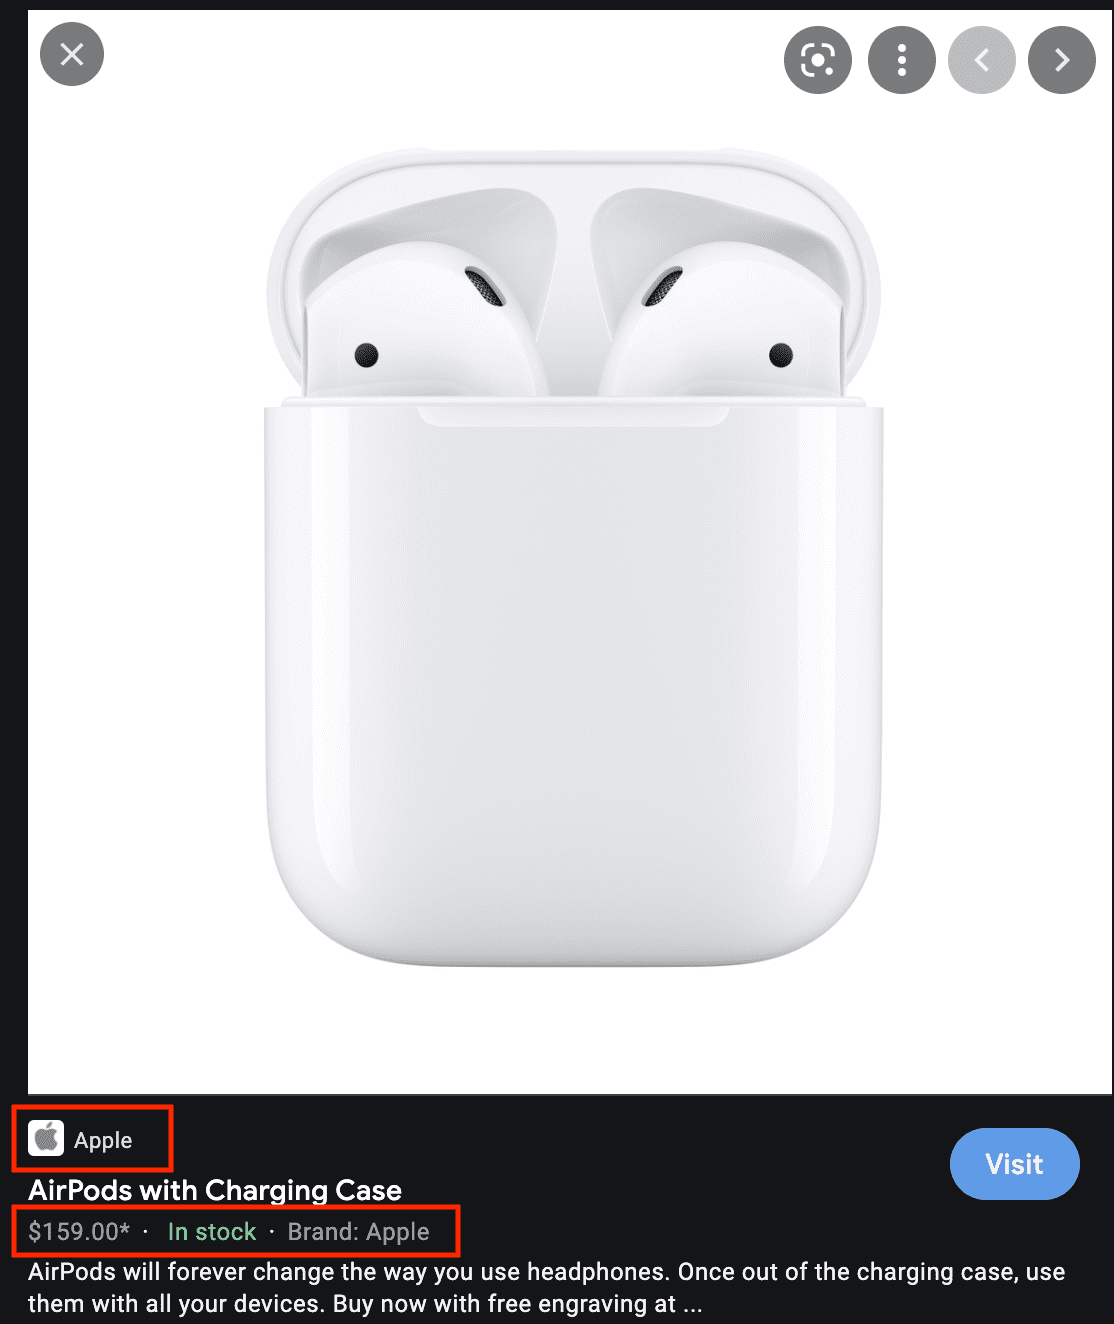 Airpods on Google